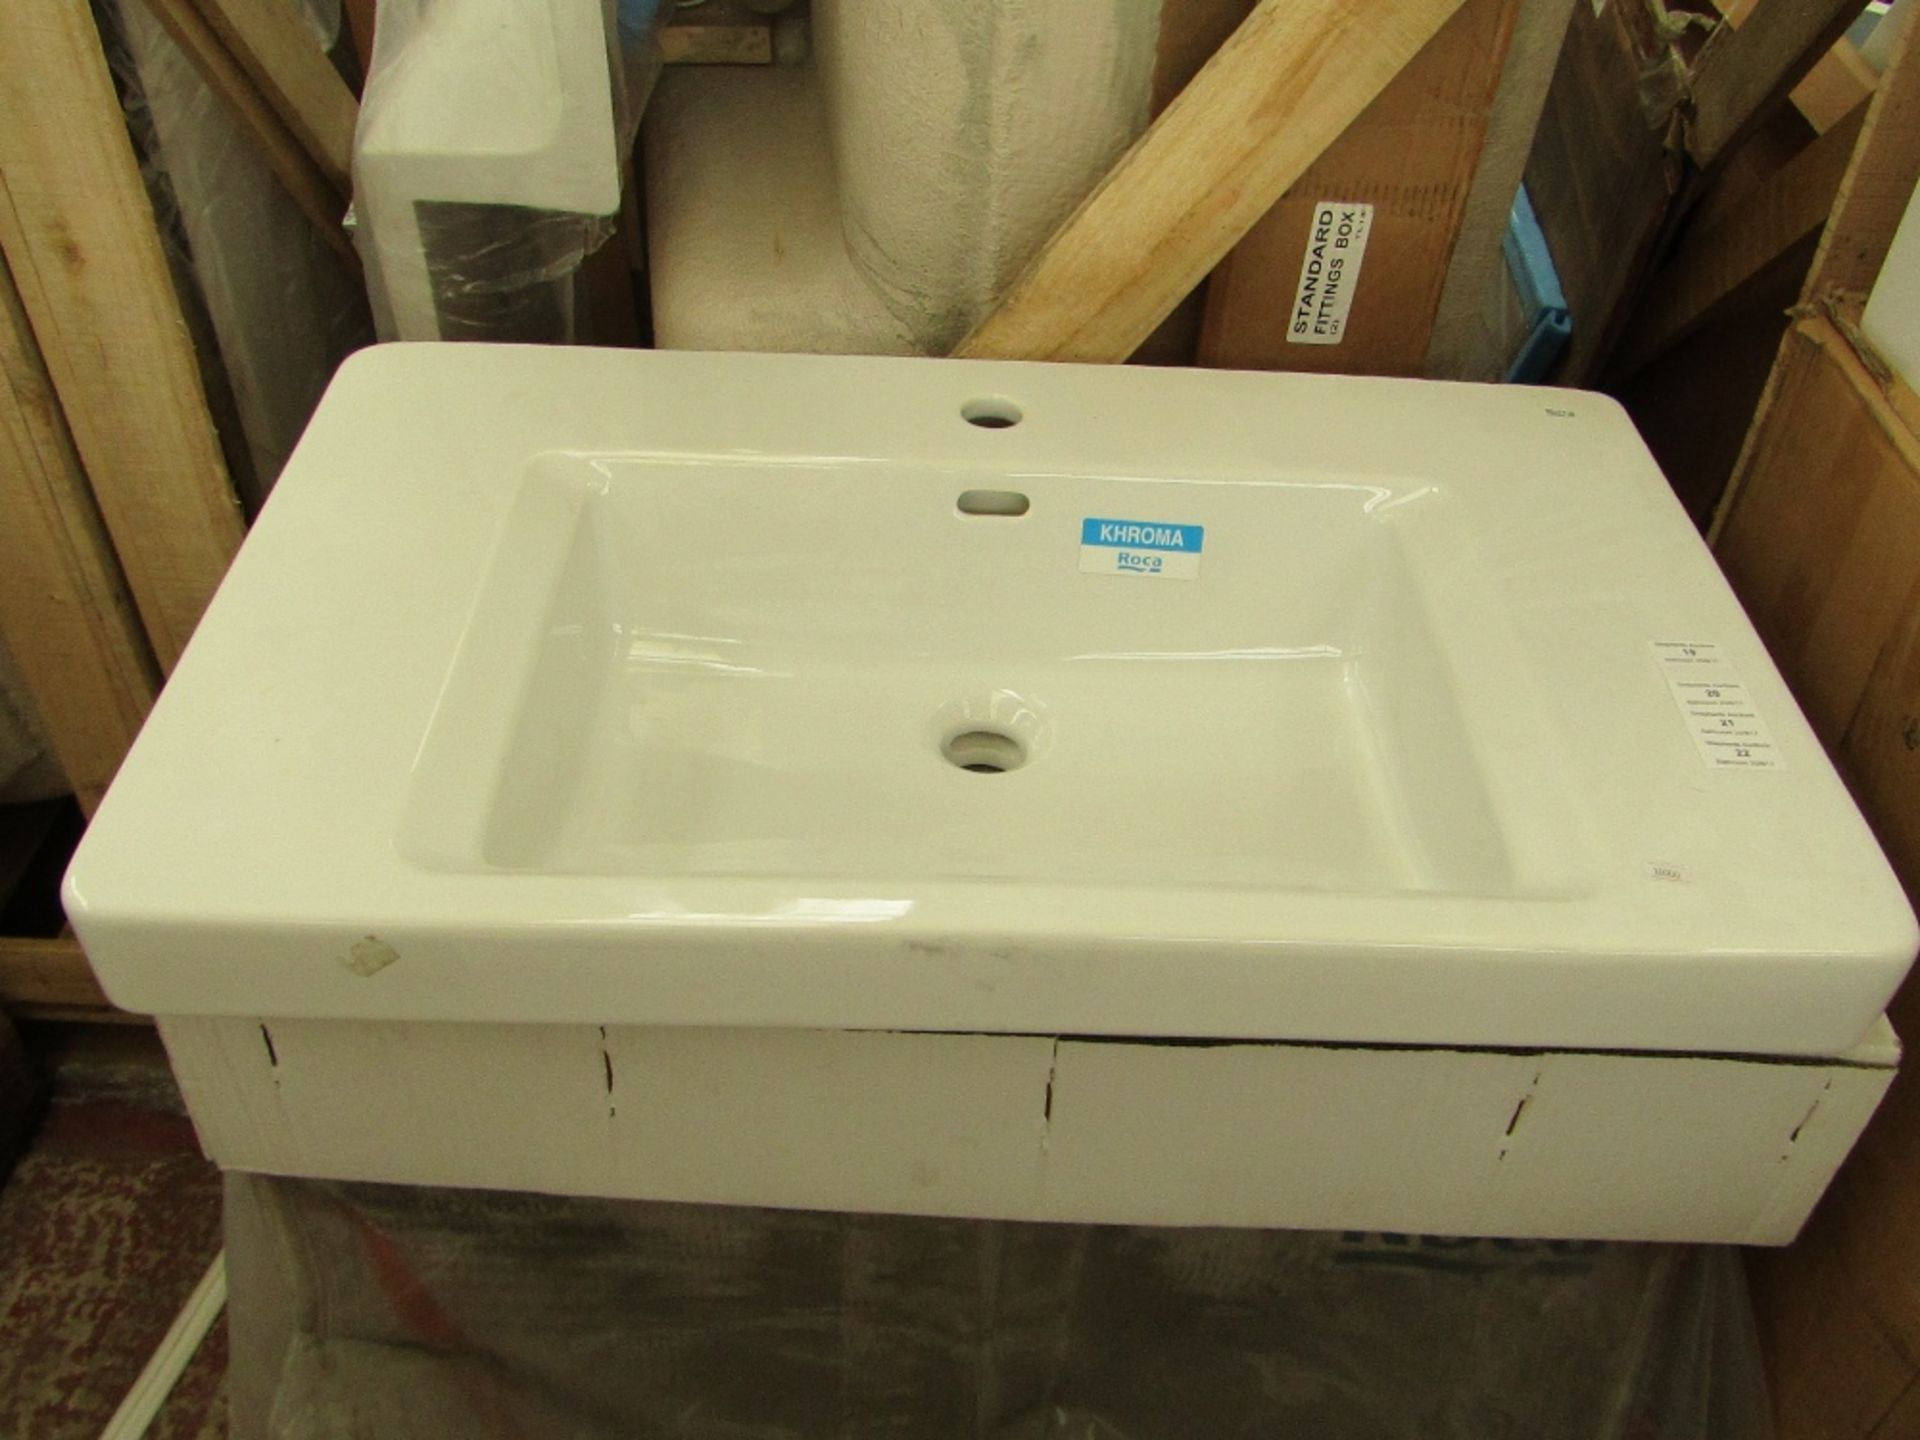 Roca Khroma 800 x 460mm Wall Hung 1TH Basin 327650000. Boxed, RRP'd at £446.22 on http://www.